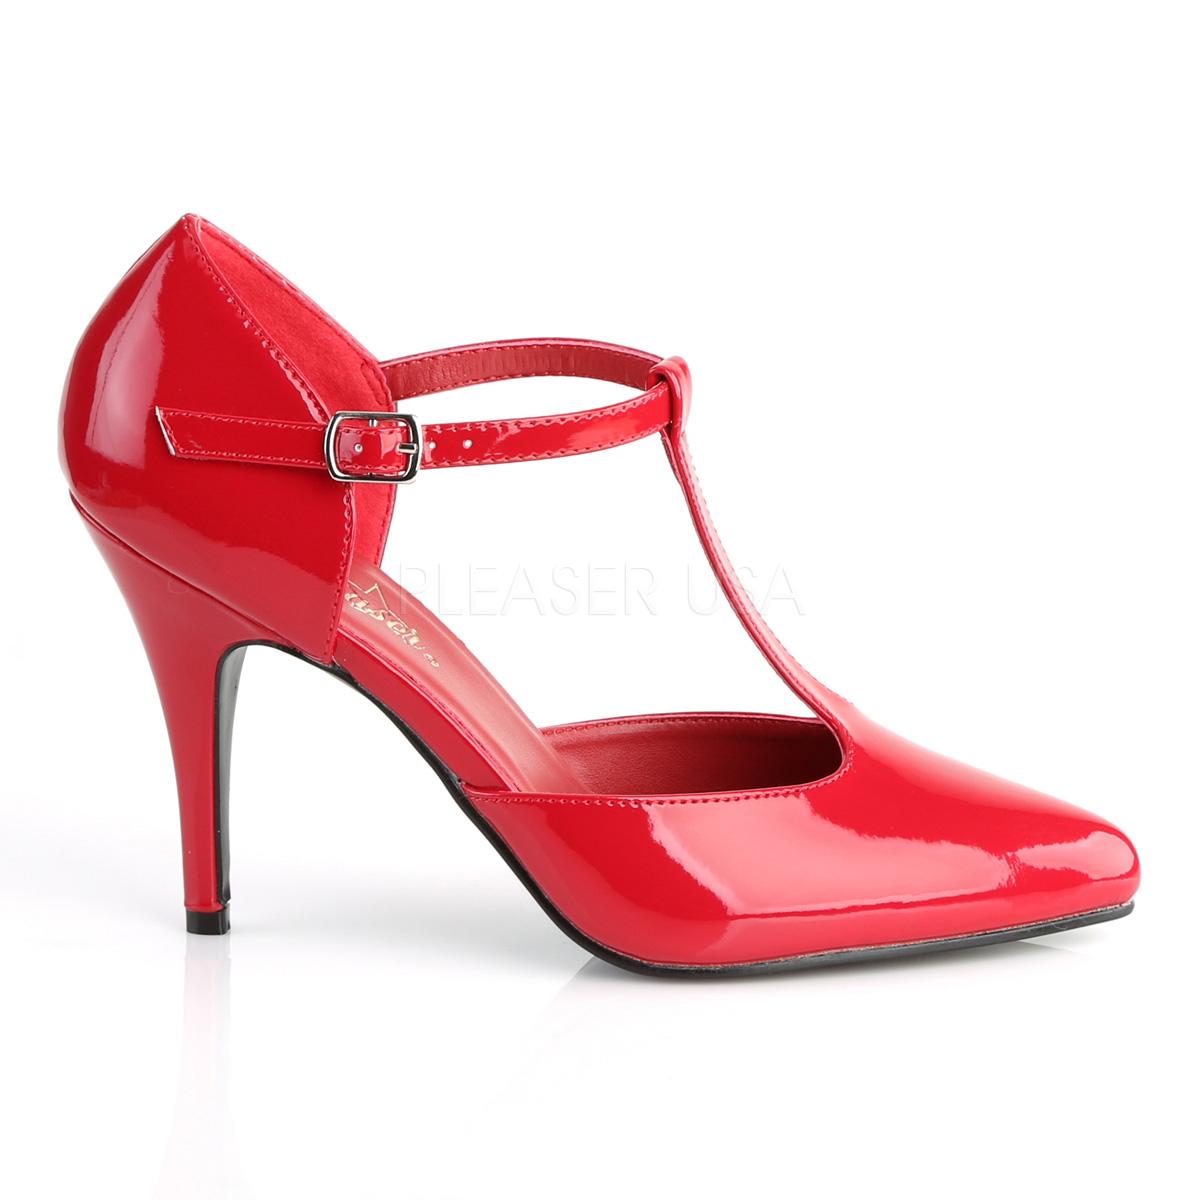 Red Patent D'Orsay style T-strap Pumps